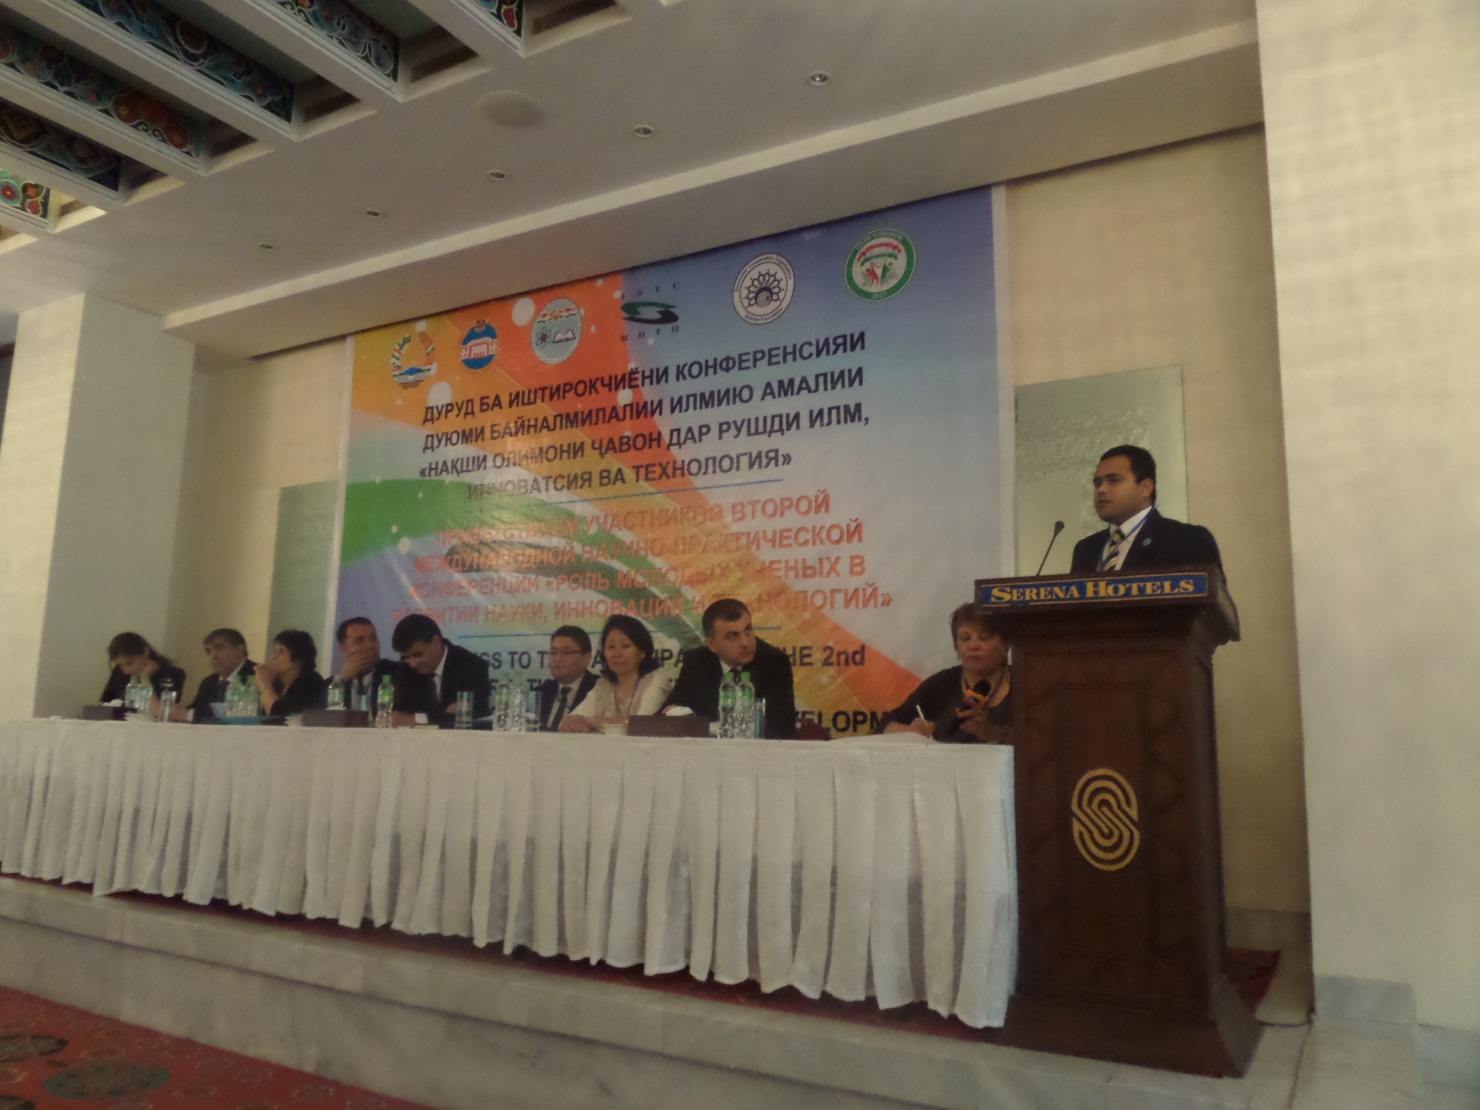 The 2nd International Conference on “The role of young scientists in the development of science, innovation and technology” (May 11-12, 2017 in Dushanbe, Tajikistan)